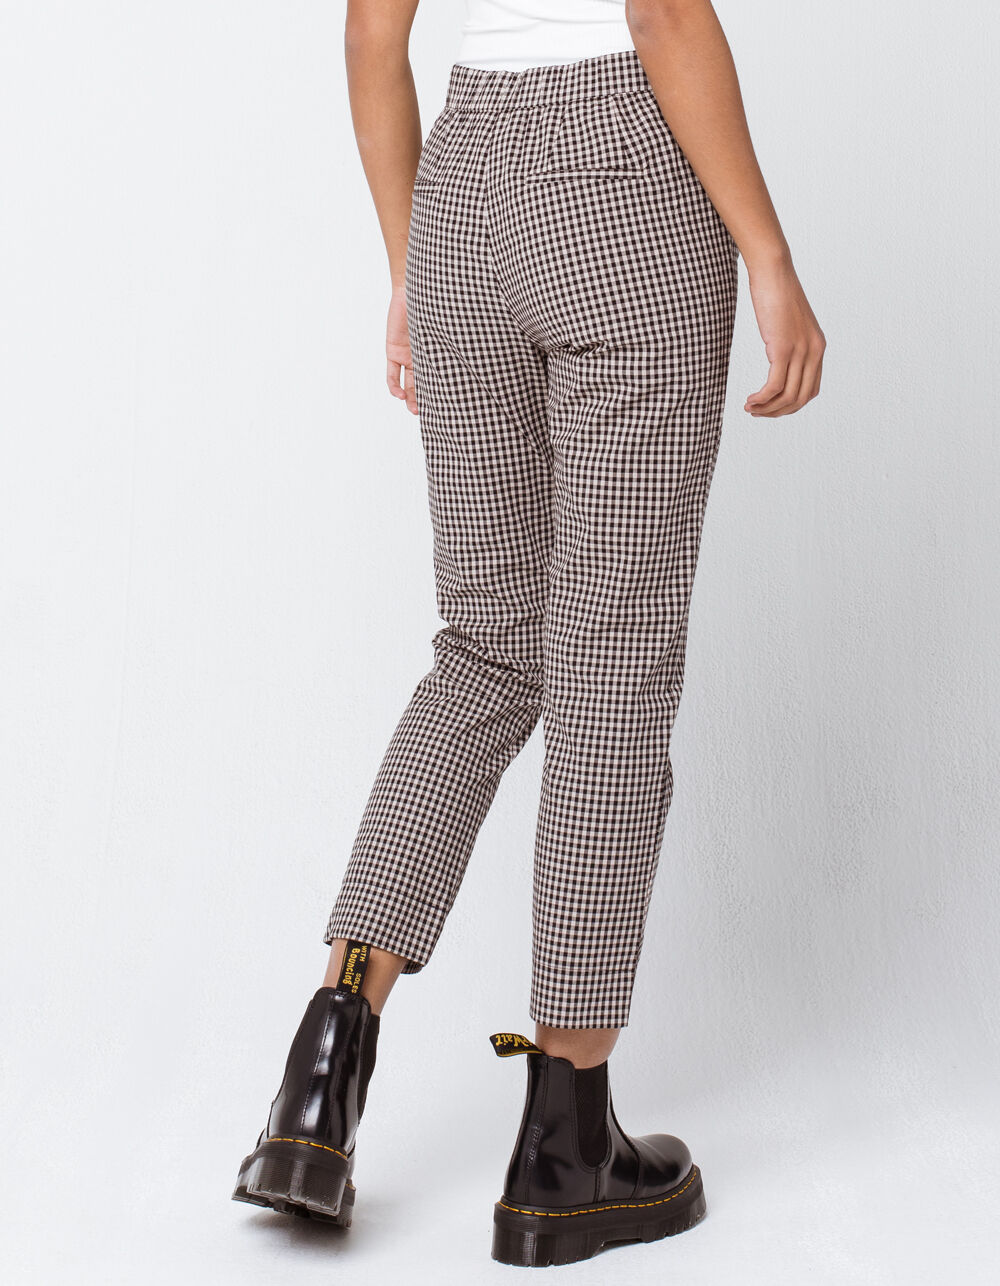 IVY & MAIN Gingham Womens Pants image number 4